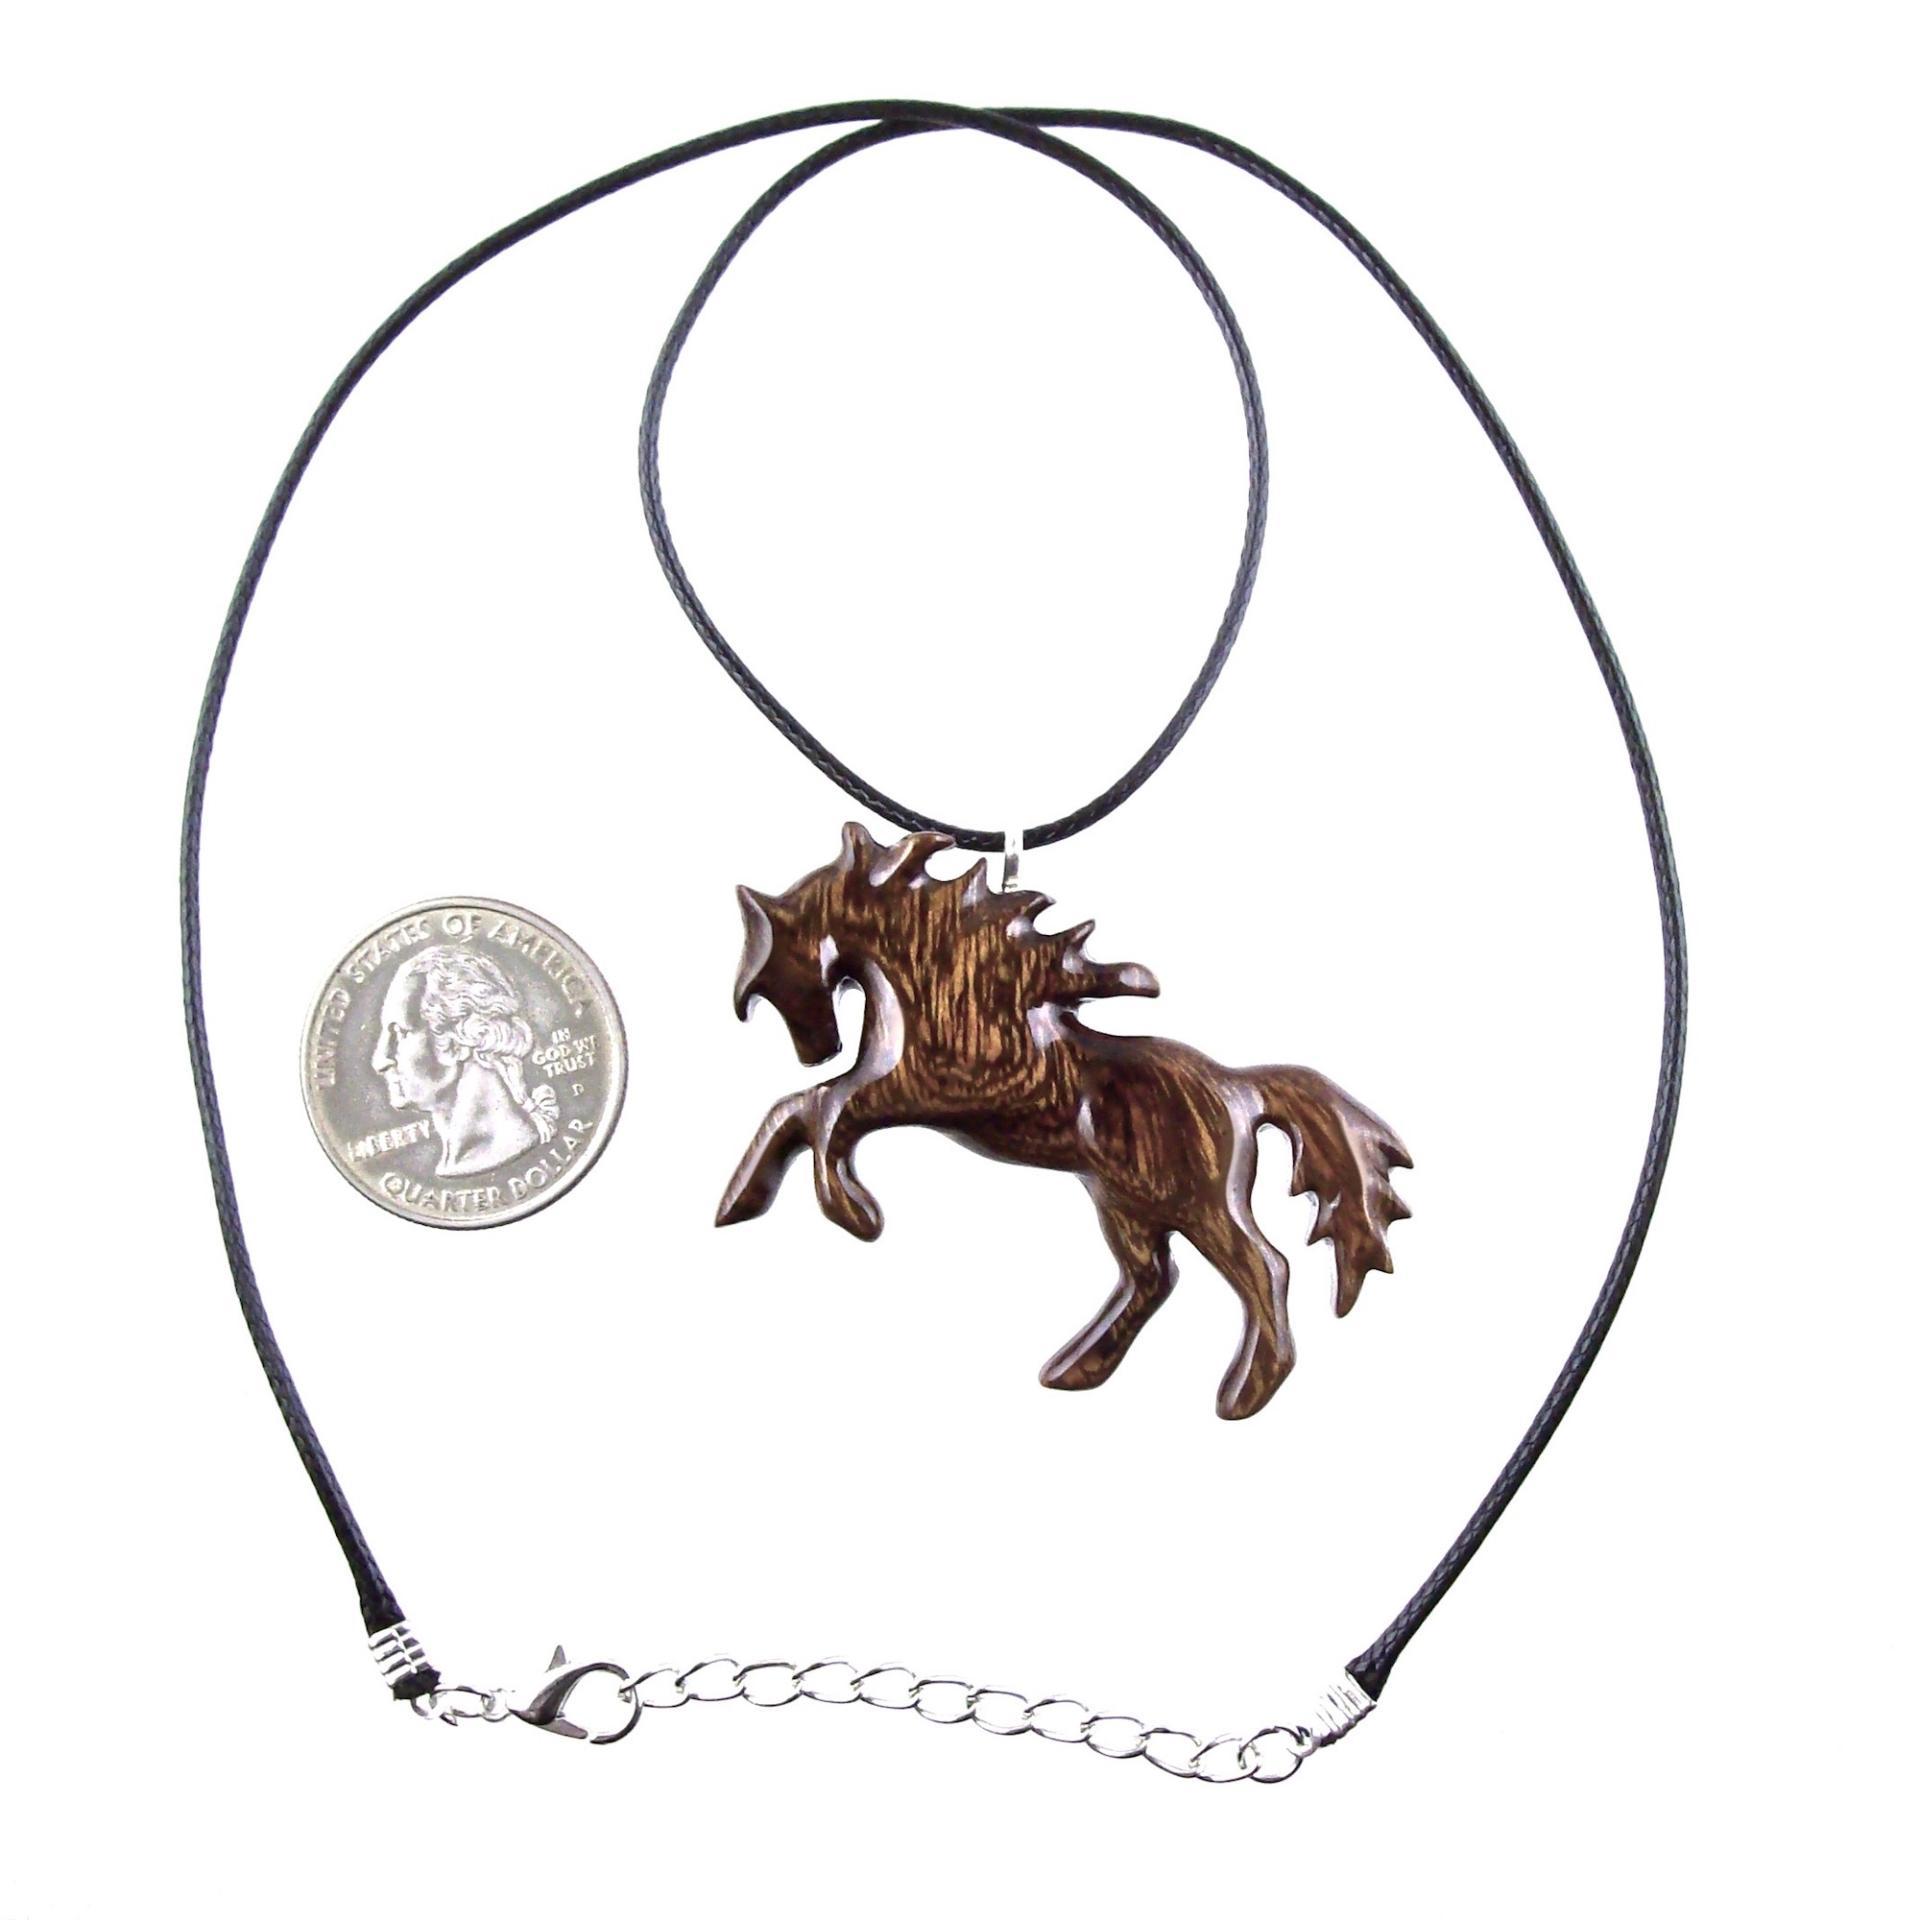 Horse Necklace, Hand Carved Wooden Horse Pendant for Men or Women, Equine Jewelry, Spirit Animal Wood Pendant